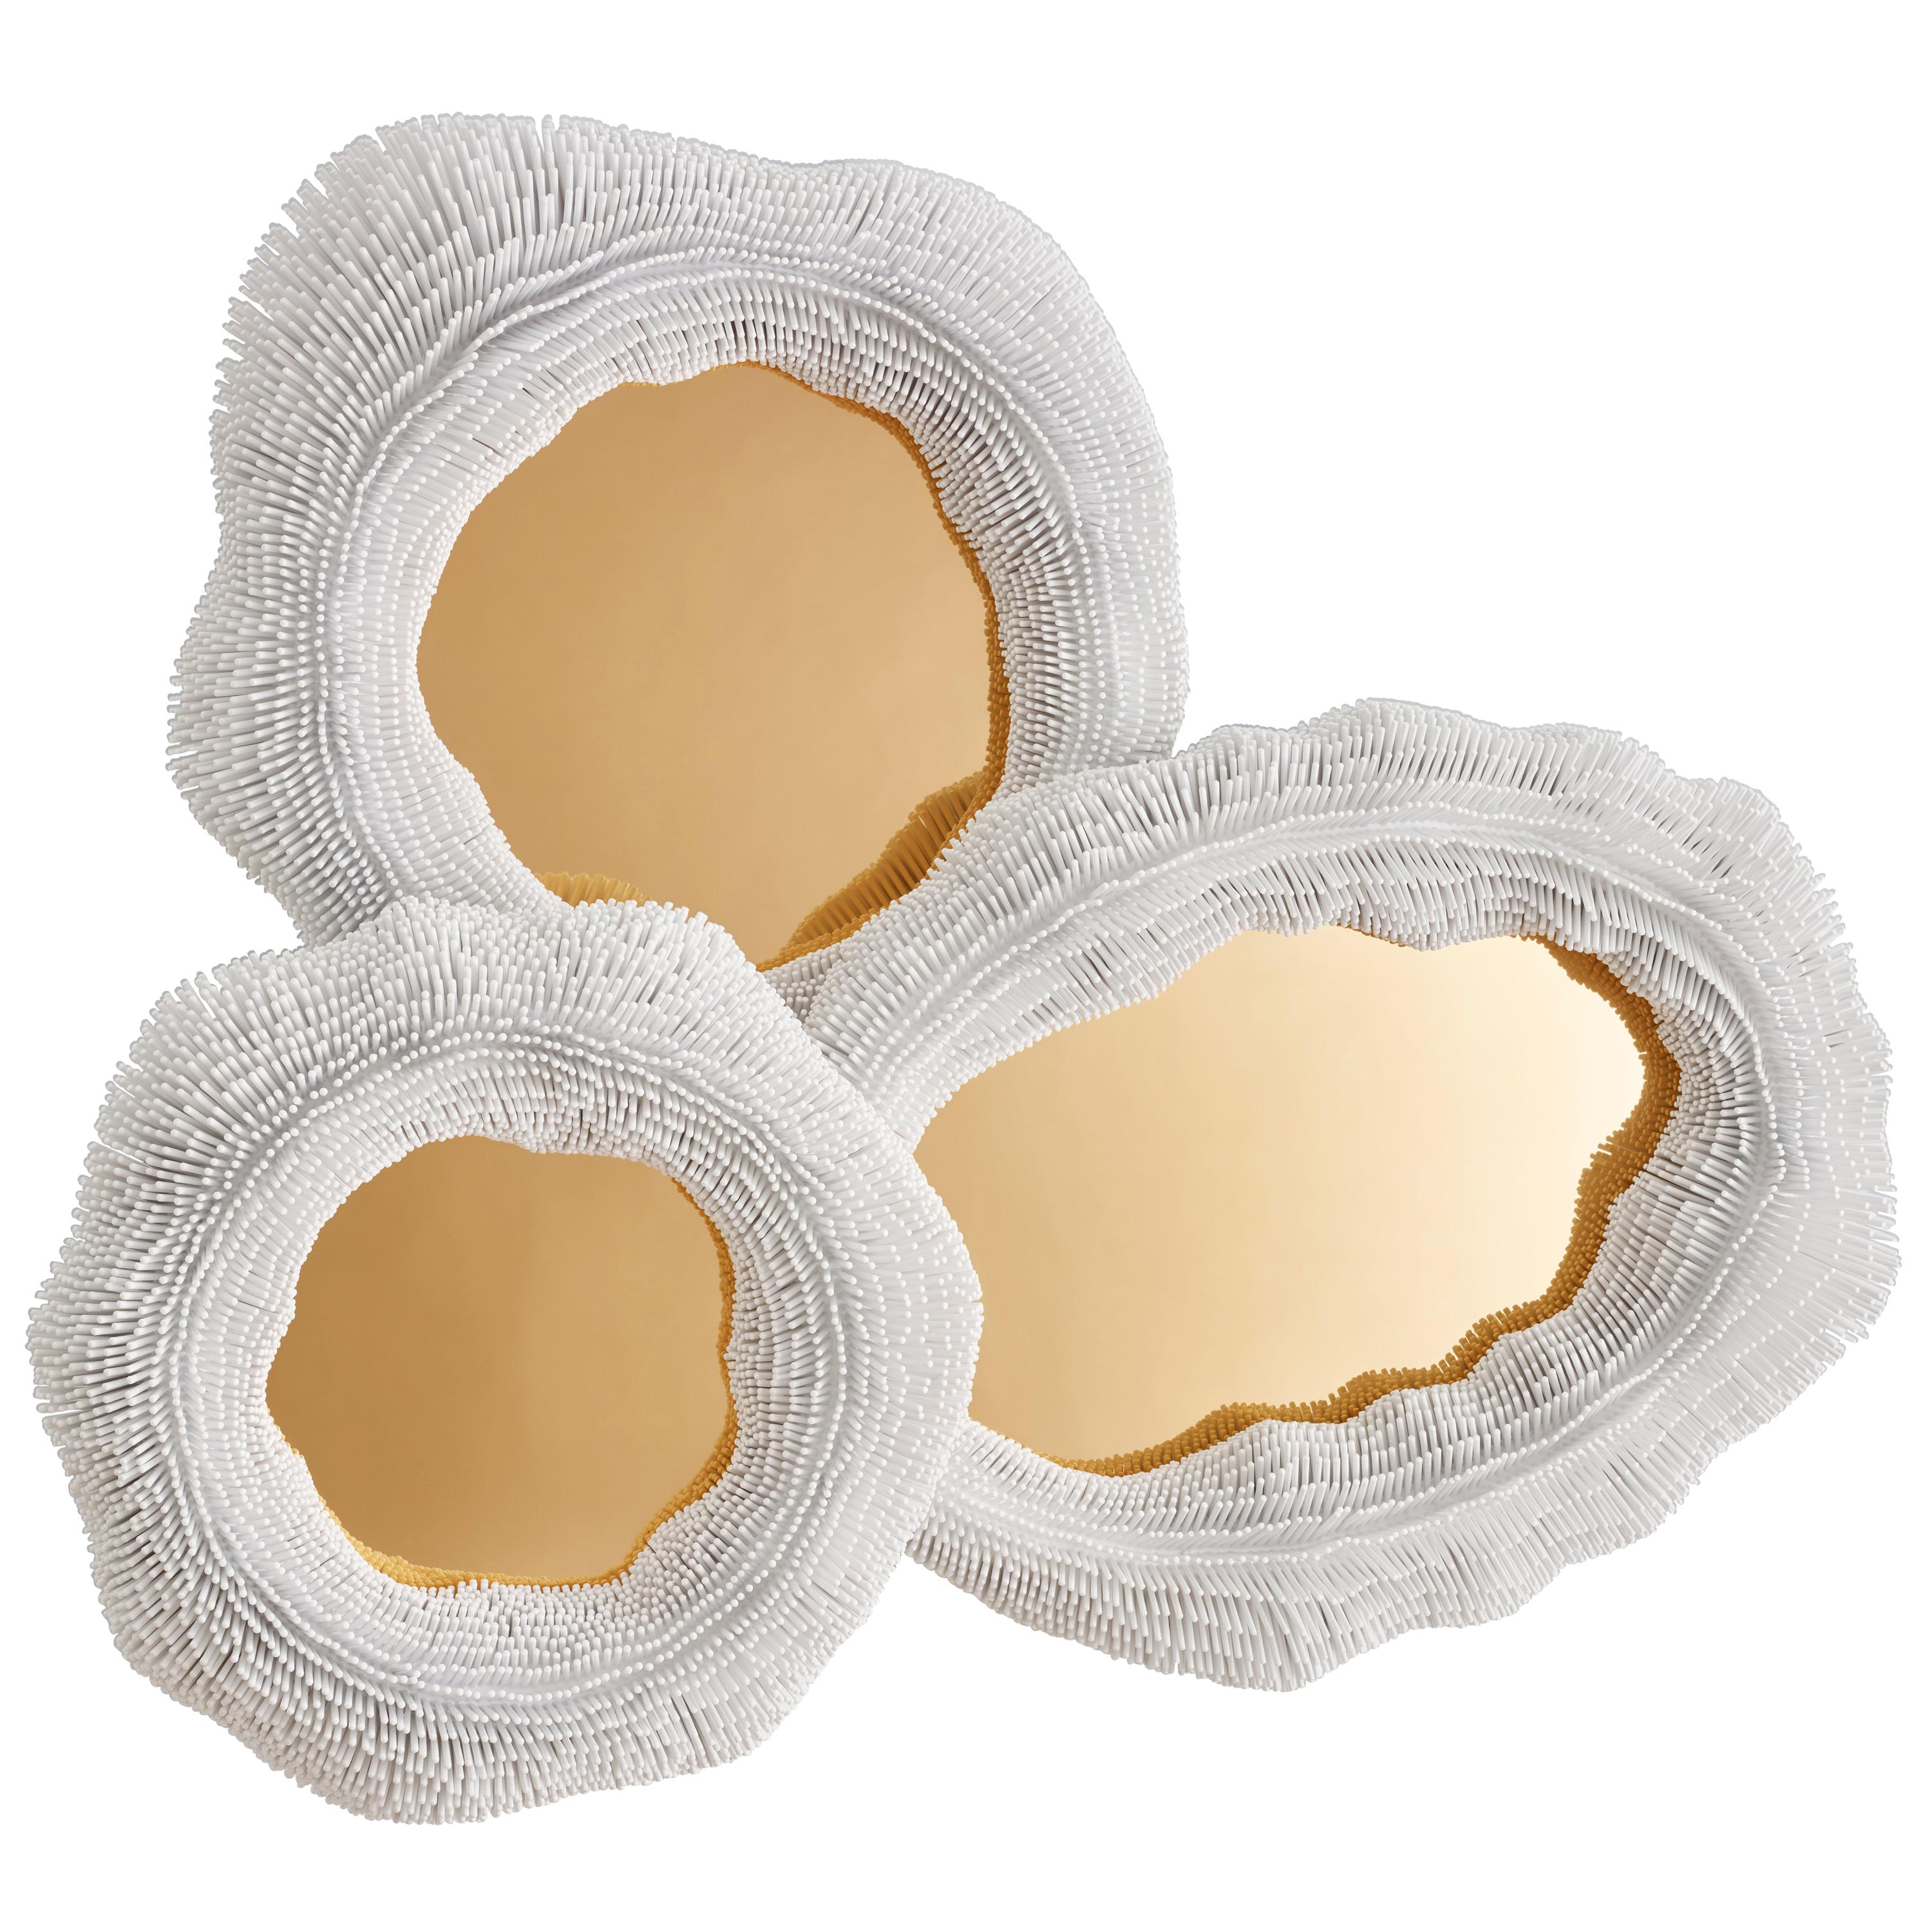 'Sea Anemone' Mirror, includes Three Mirrors Coloured in Gold - Large Size For Sale